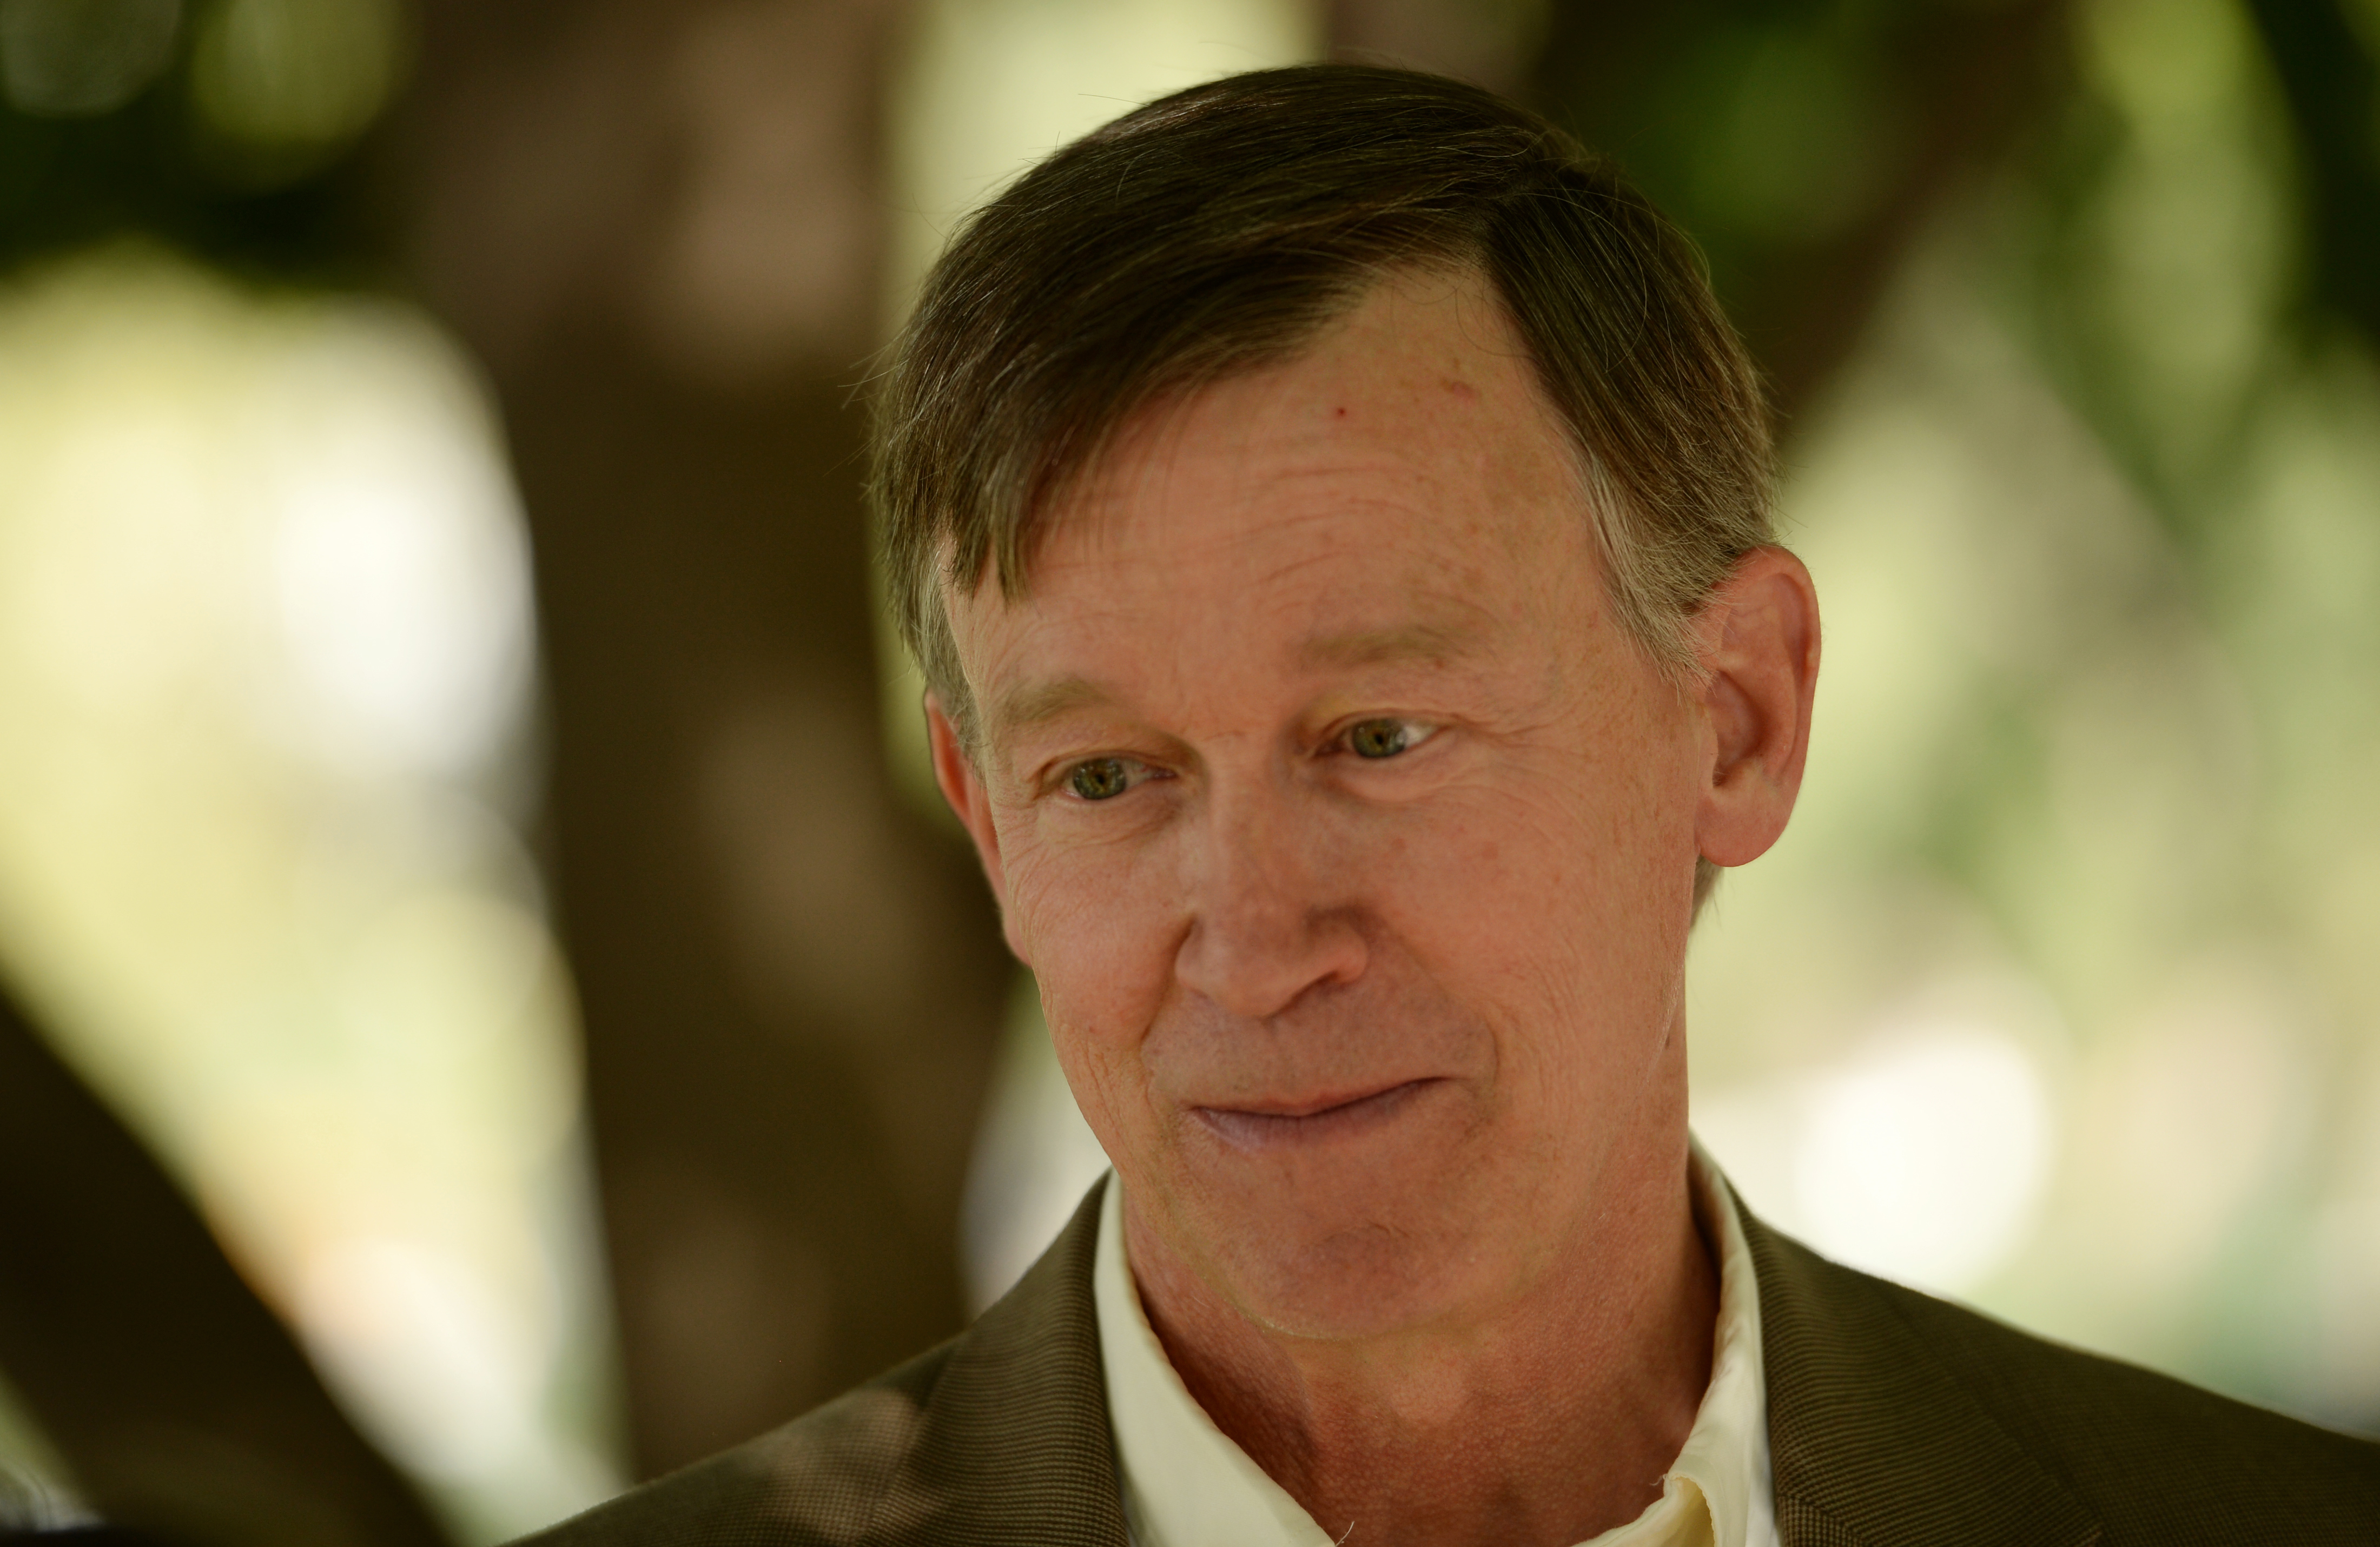 Hickenlooper down in poll